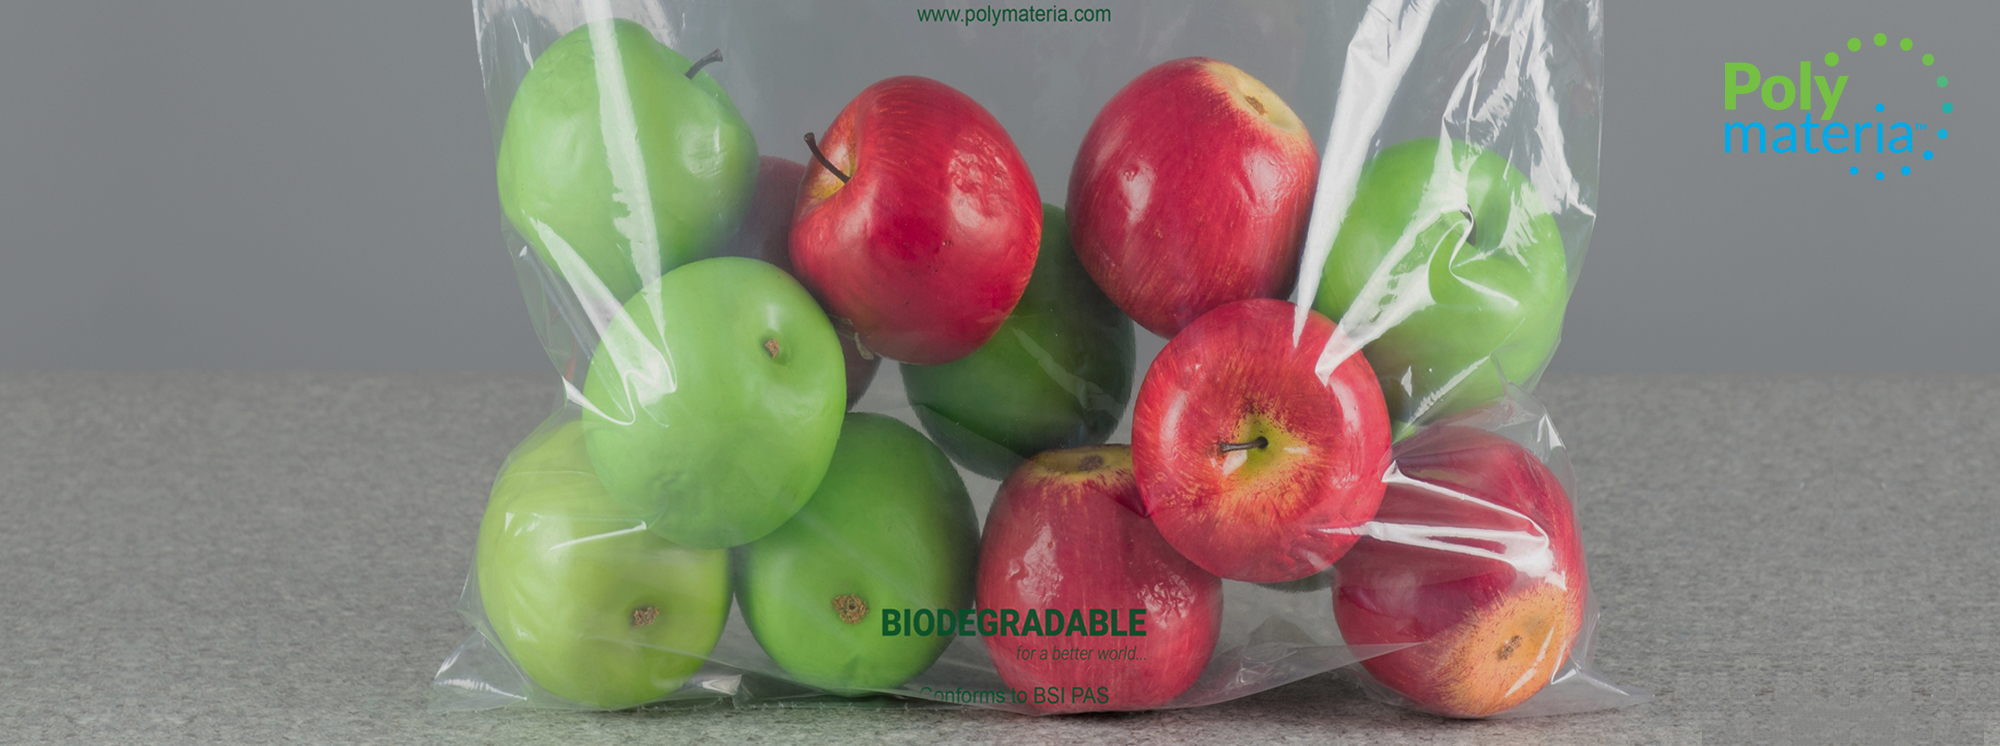 Biodegradable packing bag containing apples